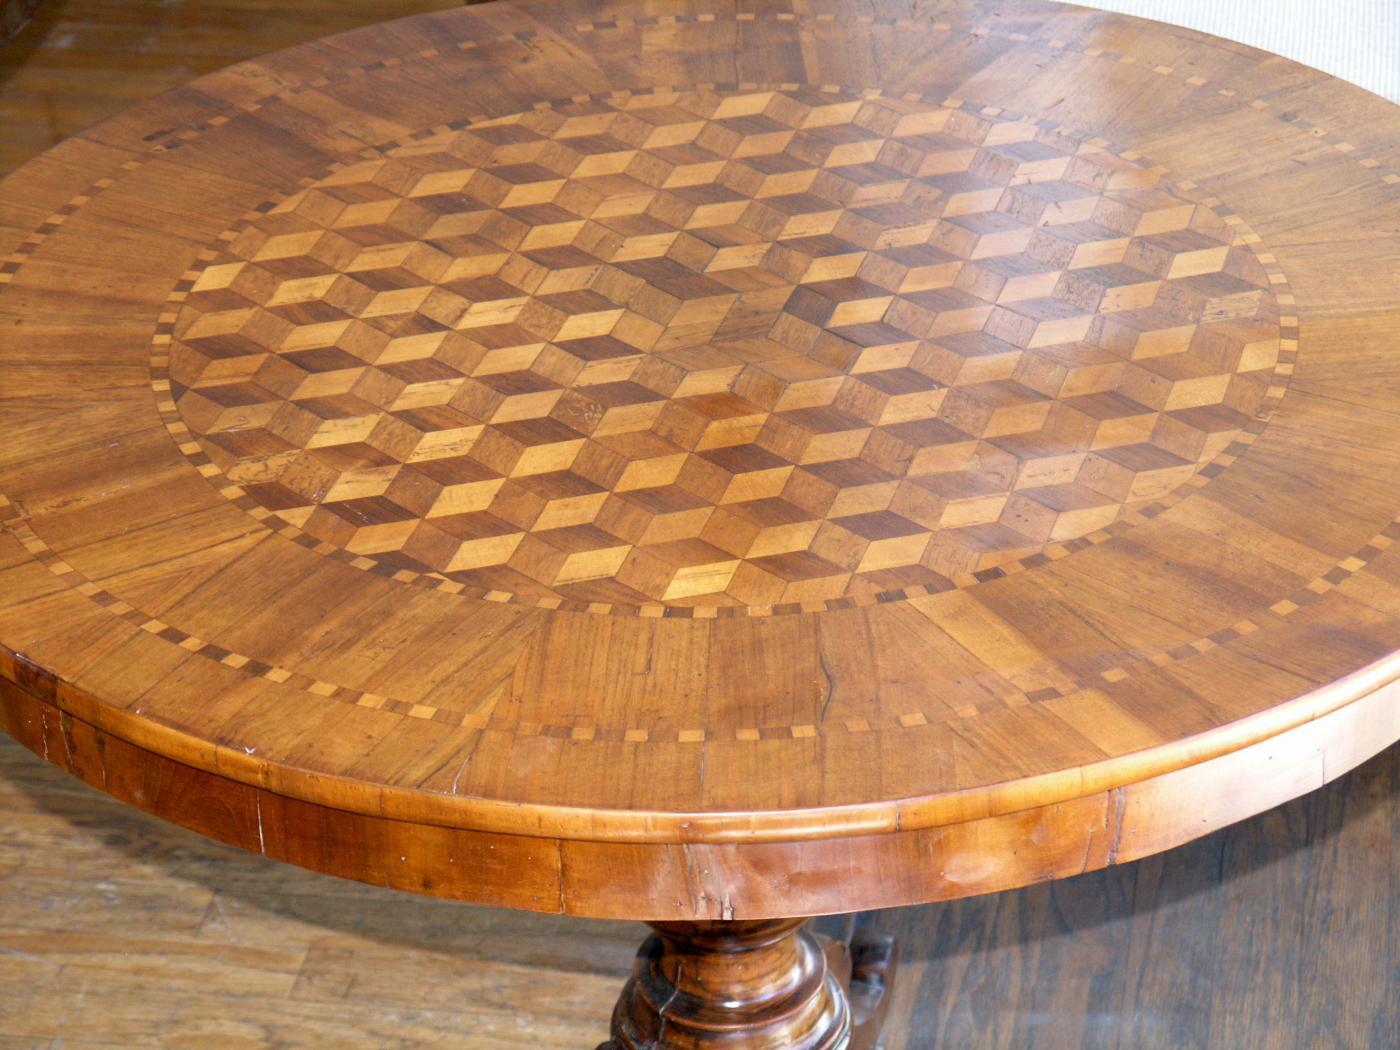 Circular marquetry inlaid top raised on a baluster turned support resting on a tripartite base with slightly scrolled feet.